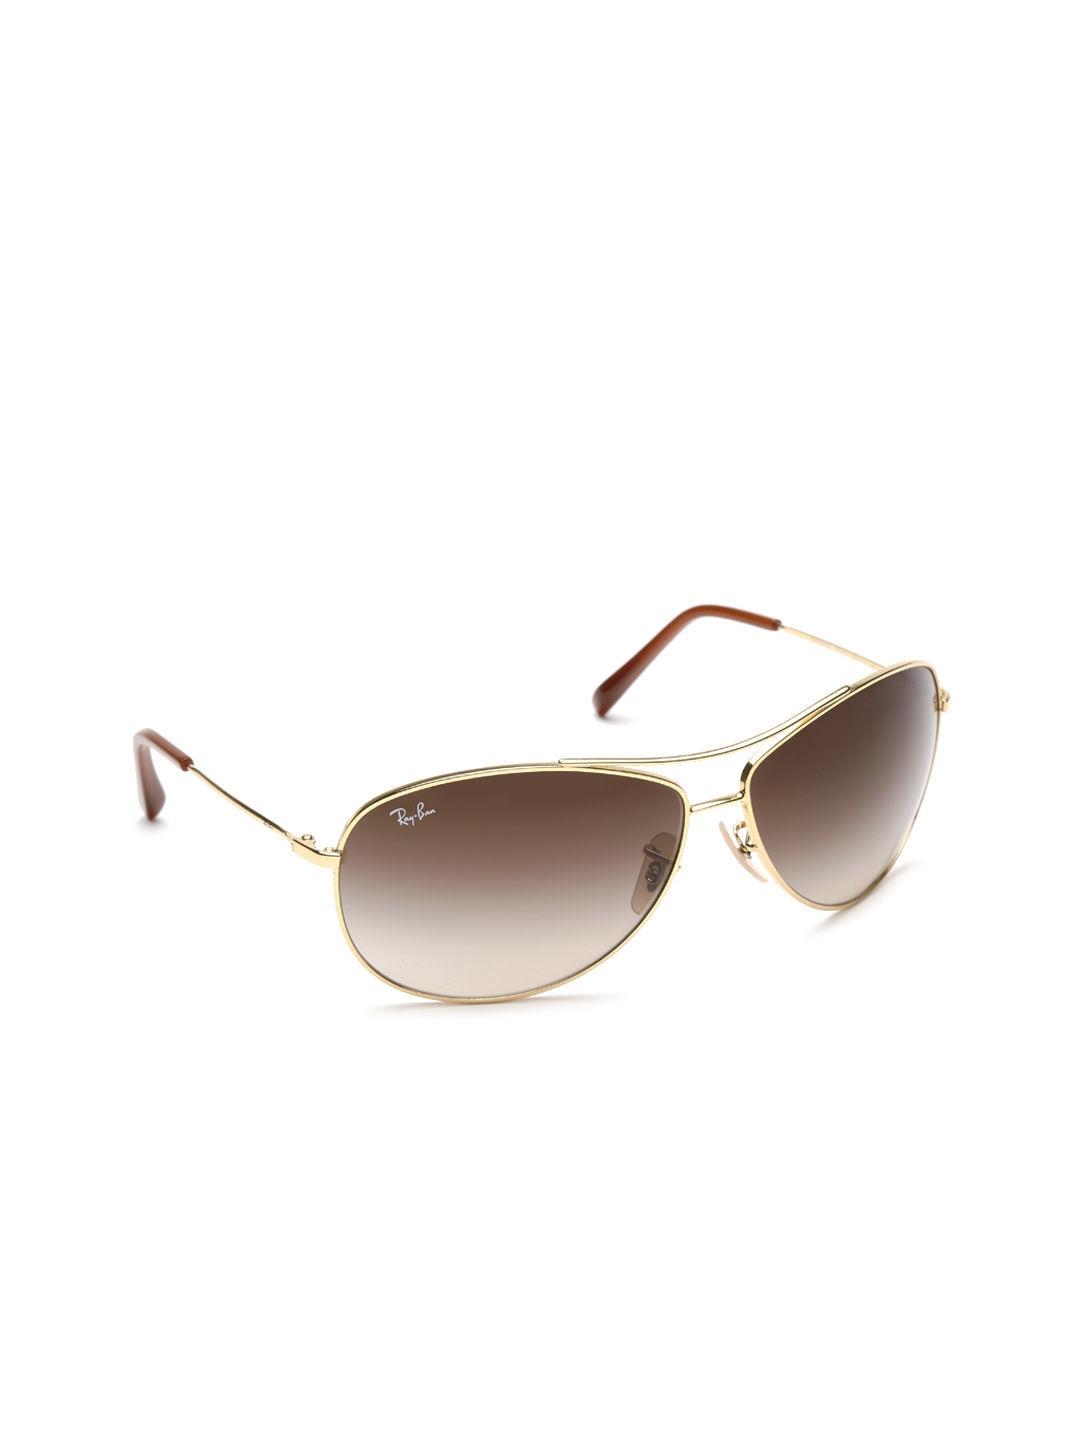 ray ban sunglasses lowest price